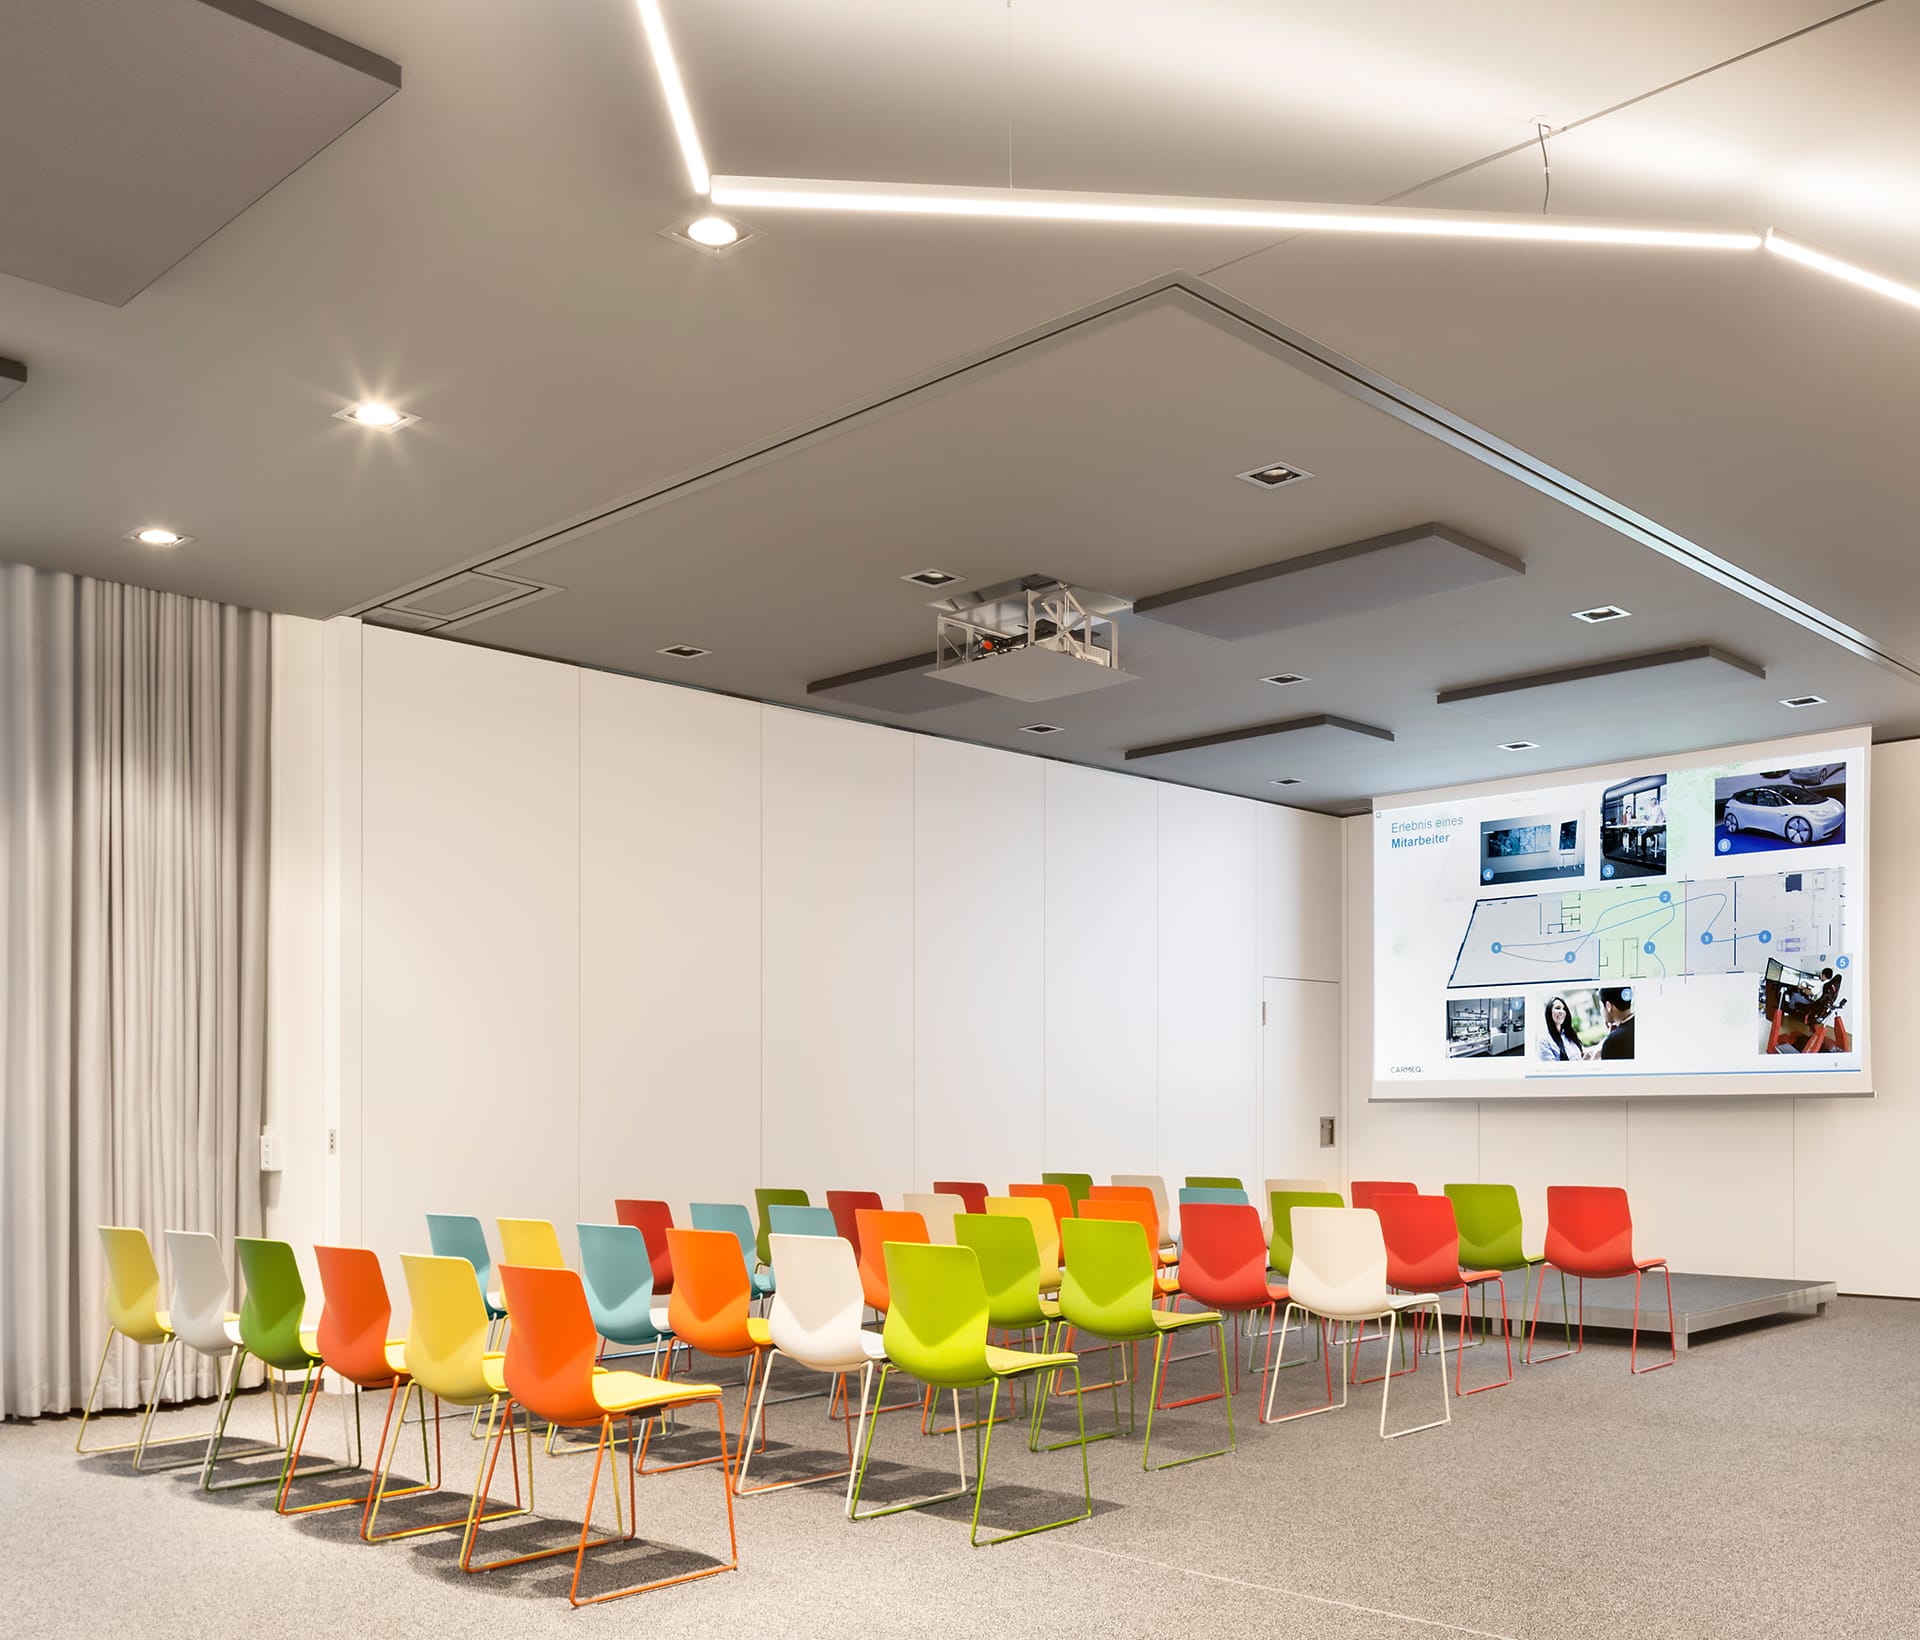 A conference room with colourful chairs and a projector screen.